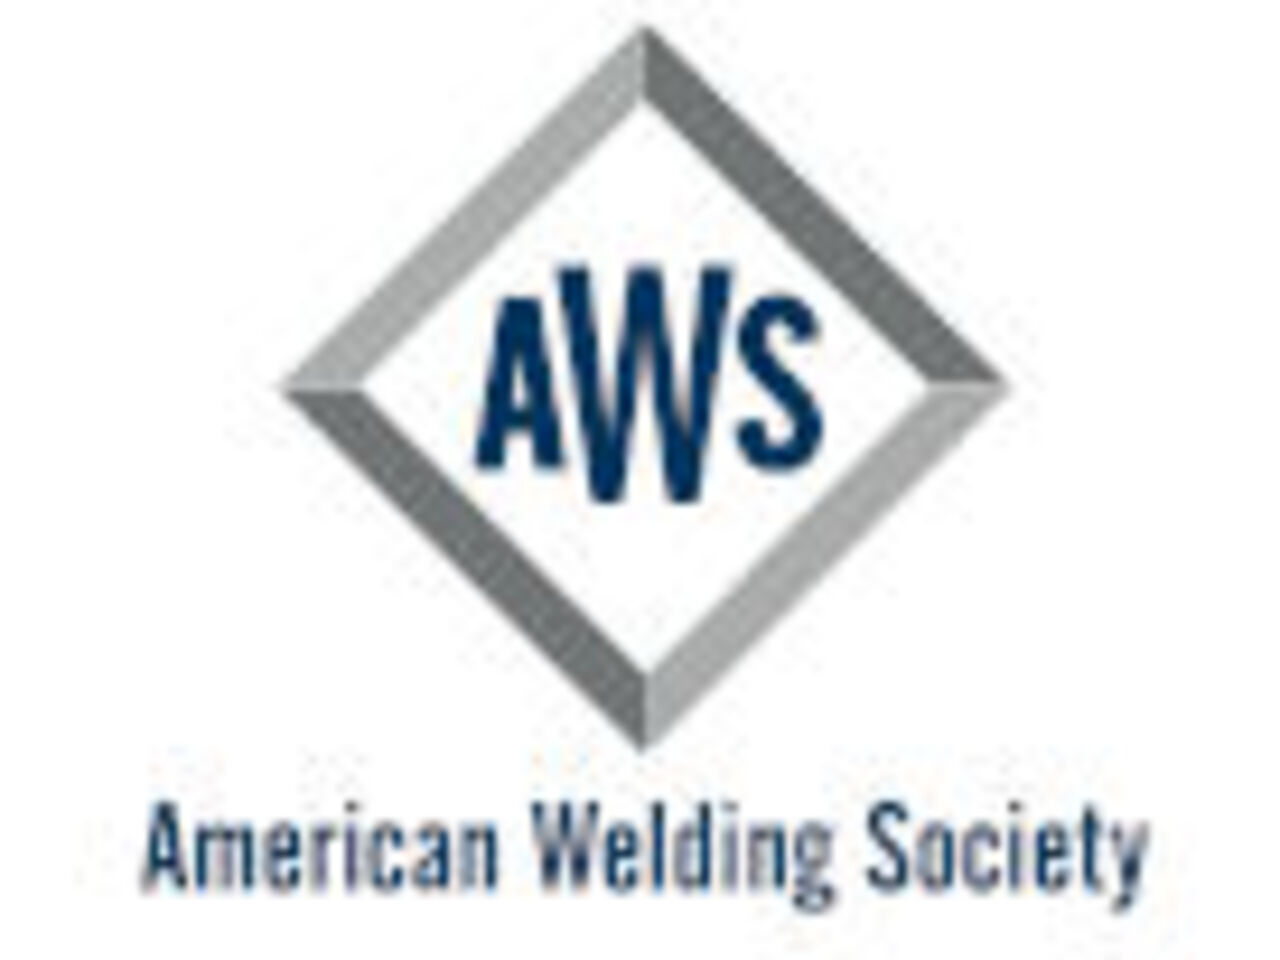 American Welding Society becomes Global Industry Partner